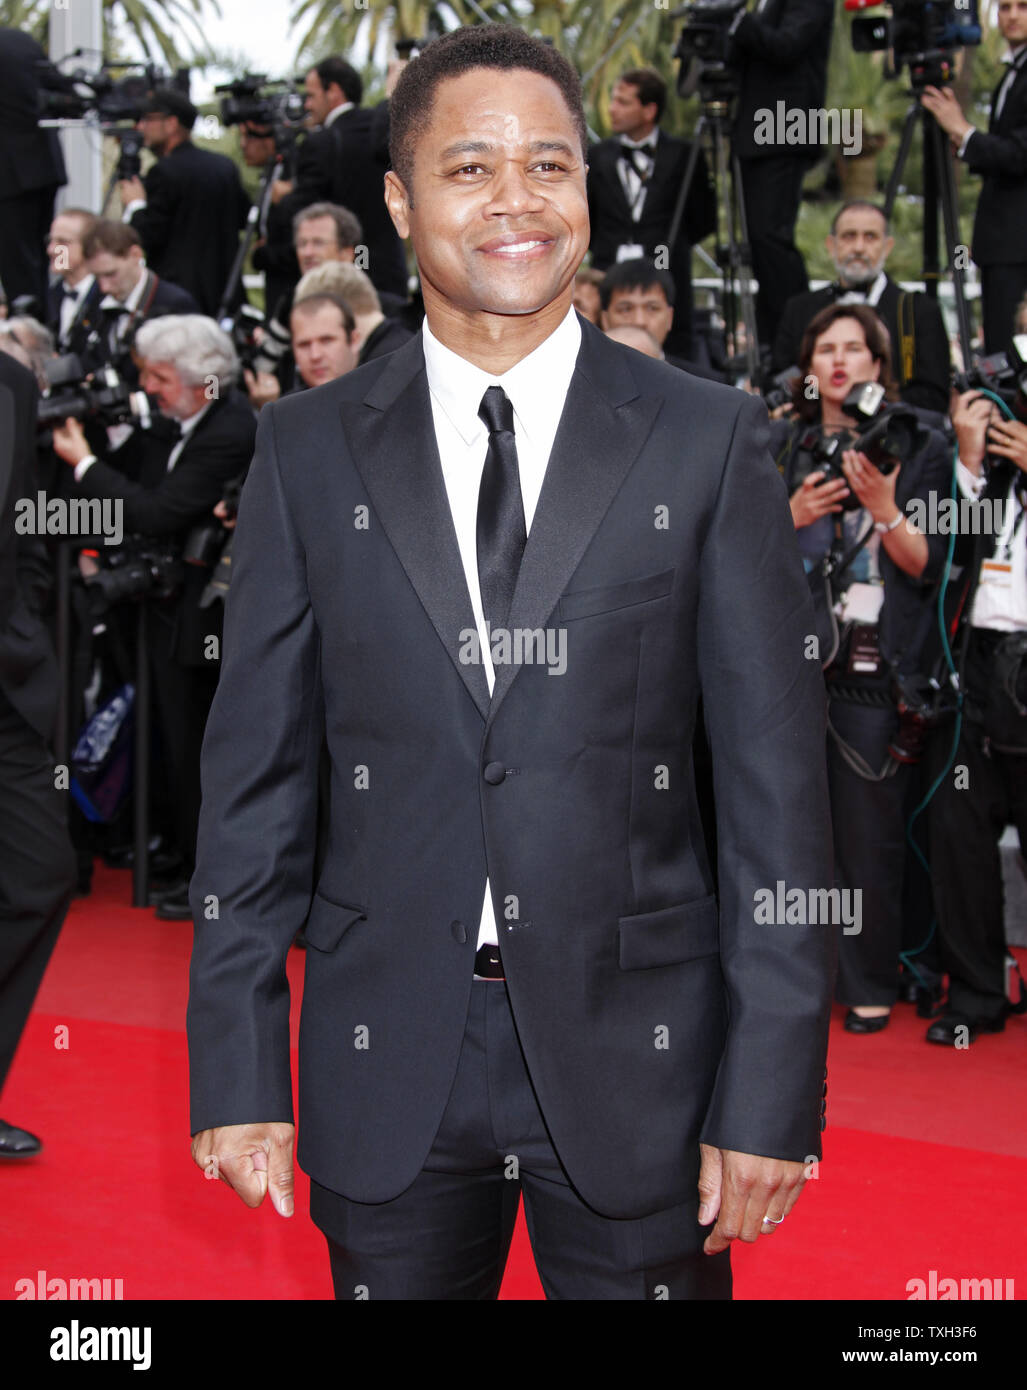 Cuba Gooding Jr. arrives on the red carpet before the screening of the film 'Robin Hood' during the opening ceremony of the 63rd annual Cannes International Film Festival in Cannes, France on May 12, 2010.  UPI/David Silpa Stock Photo